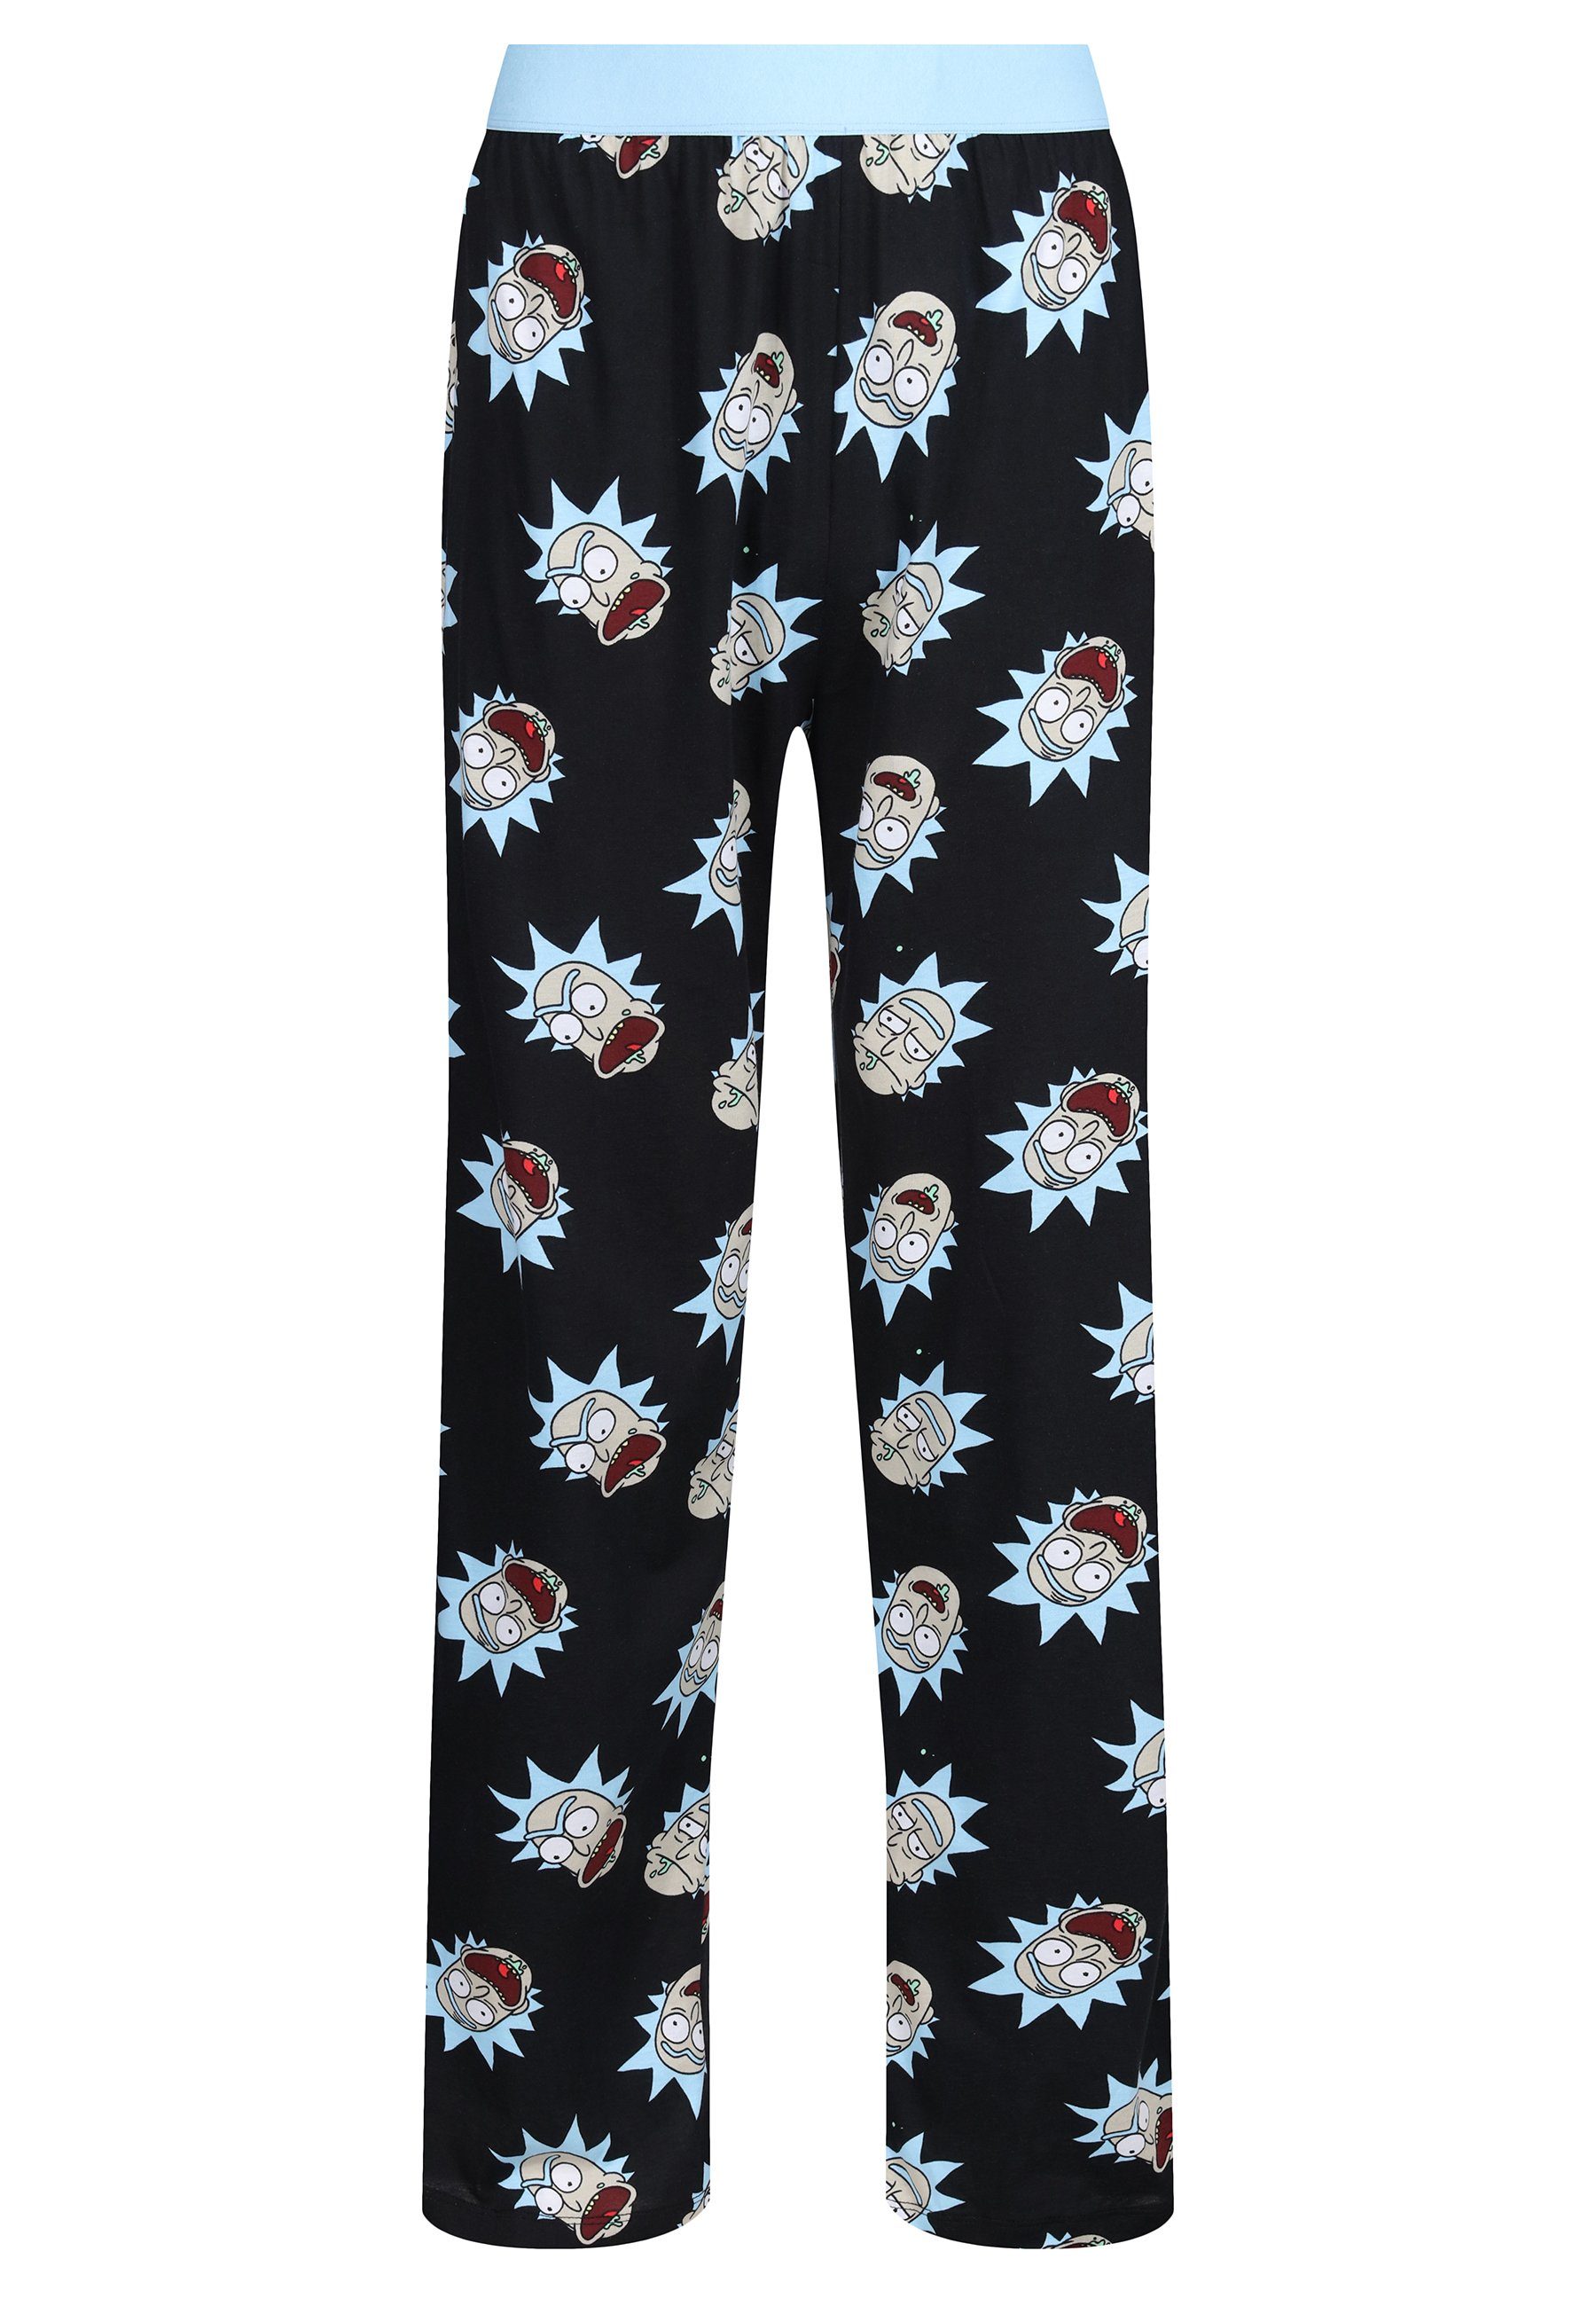 Recovered Loungepants Lounge Pant - Rick and Morty Faces all over print - Black